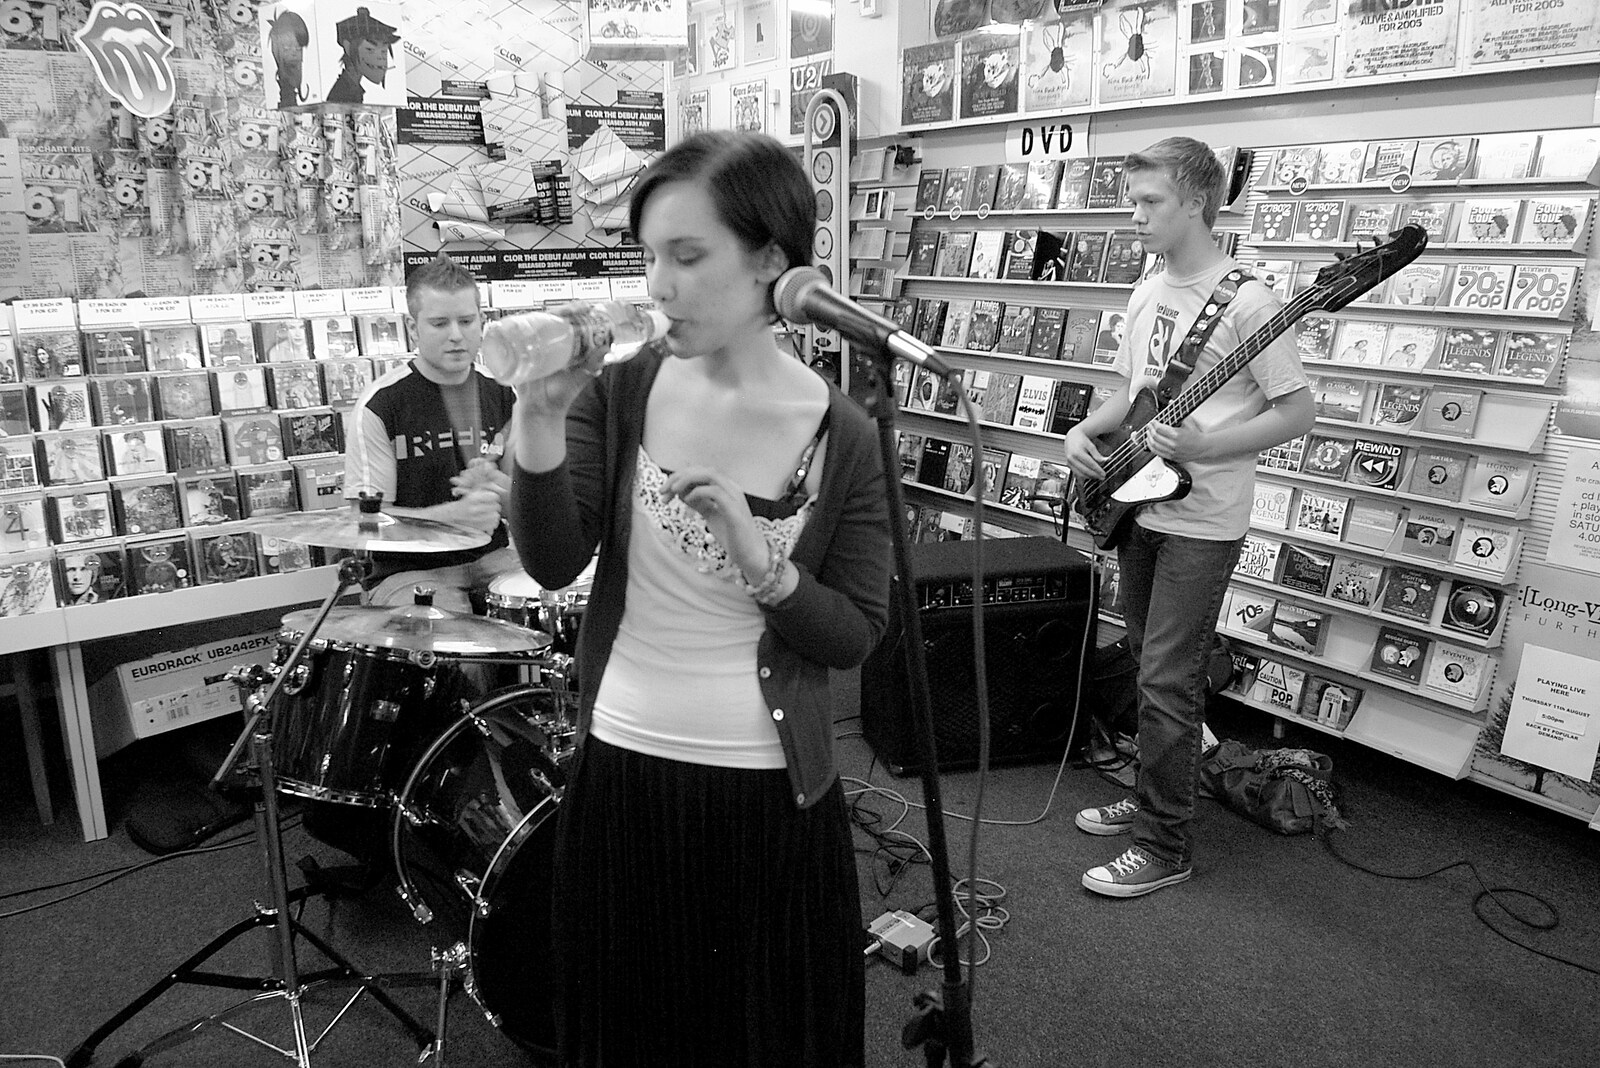 Time for a slurp of water from Richard Panton's Van and Alex Hill at Revolution Records, Diss and Cambridge - 29th July 2005